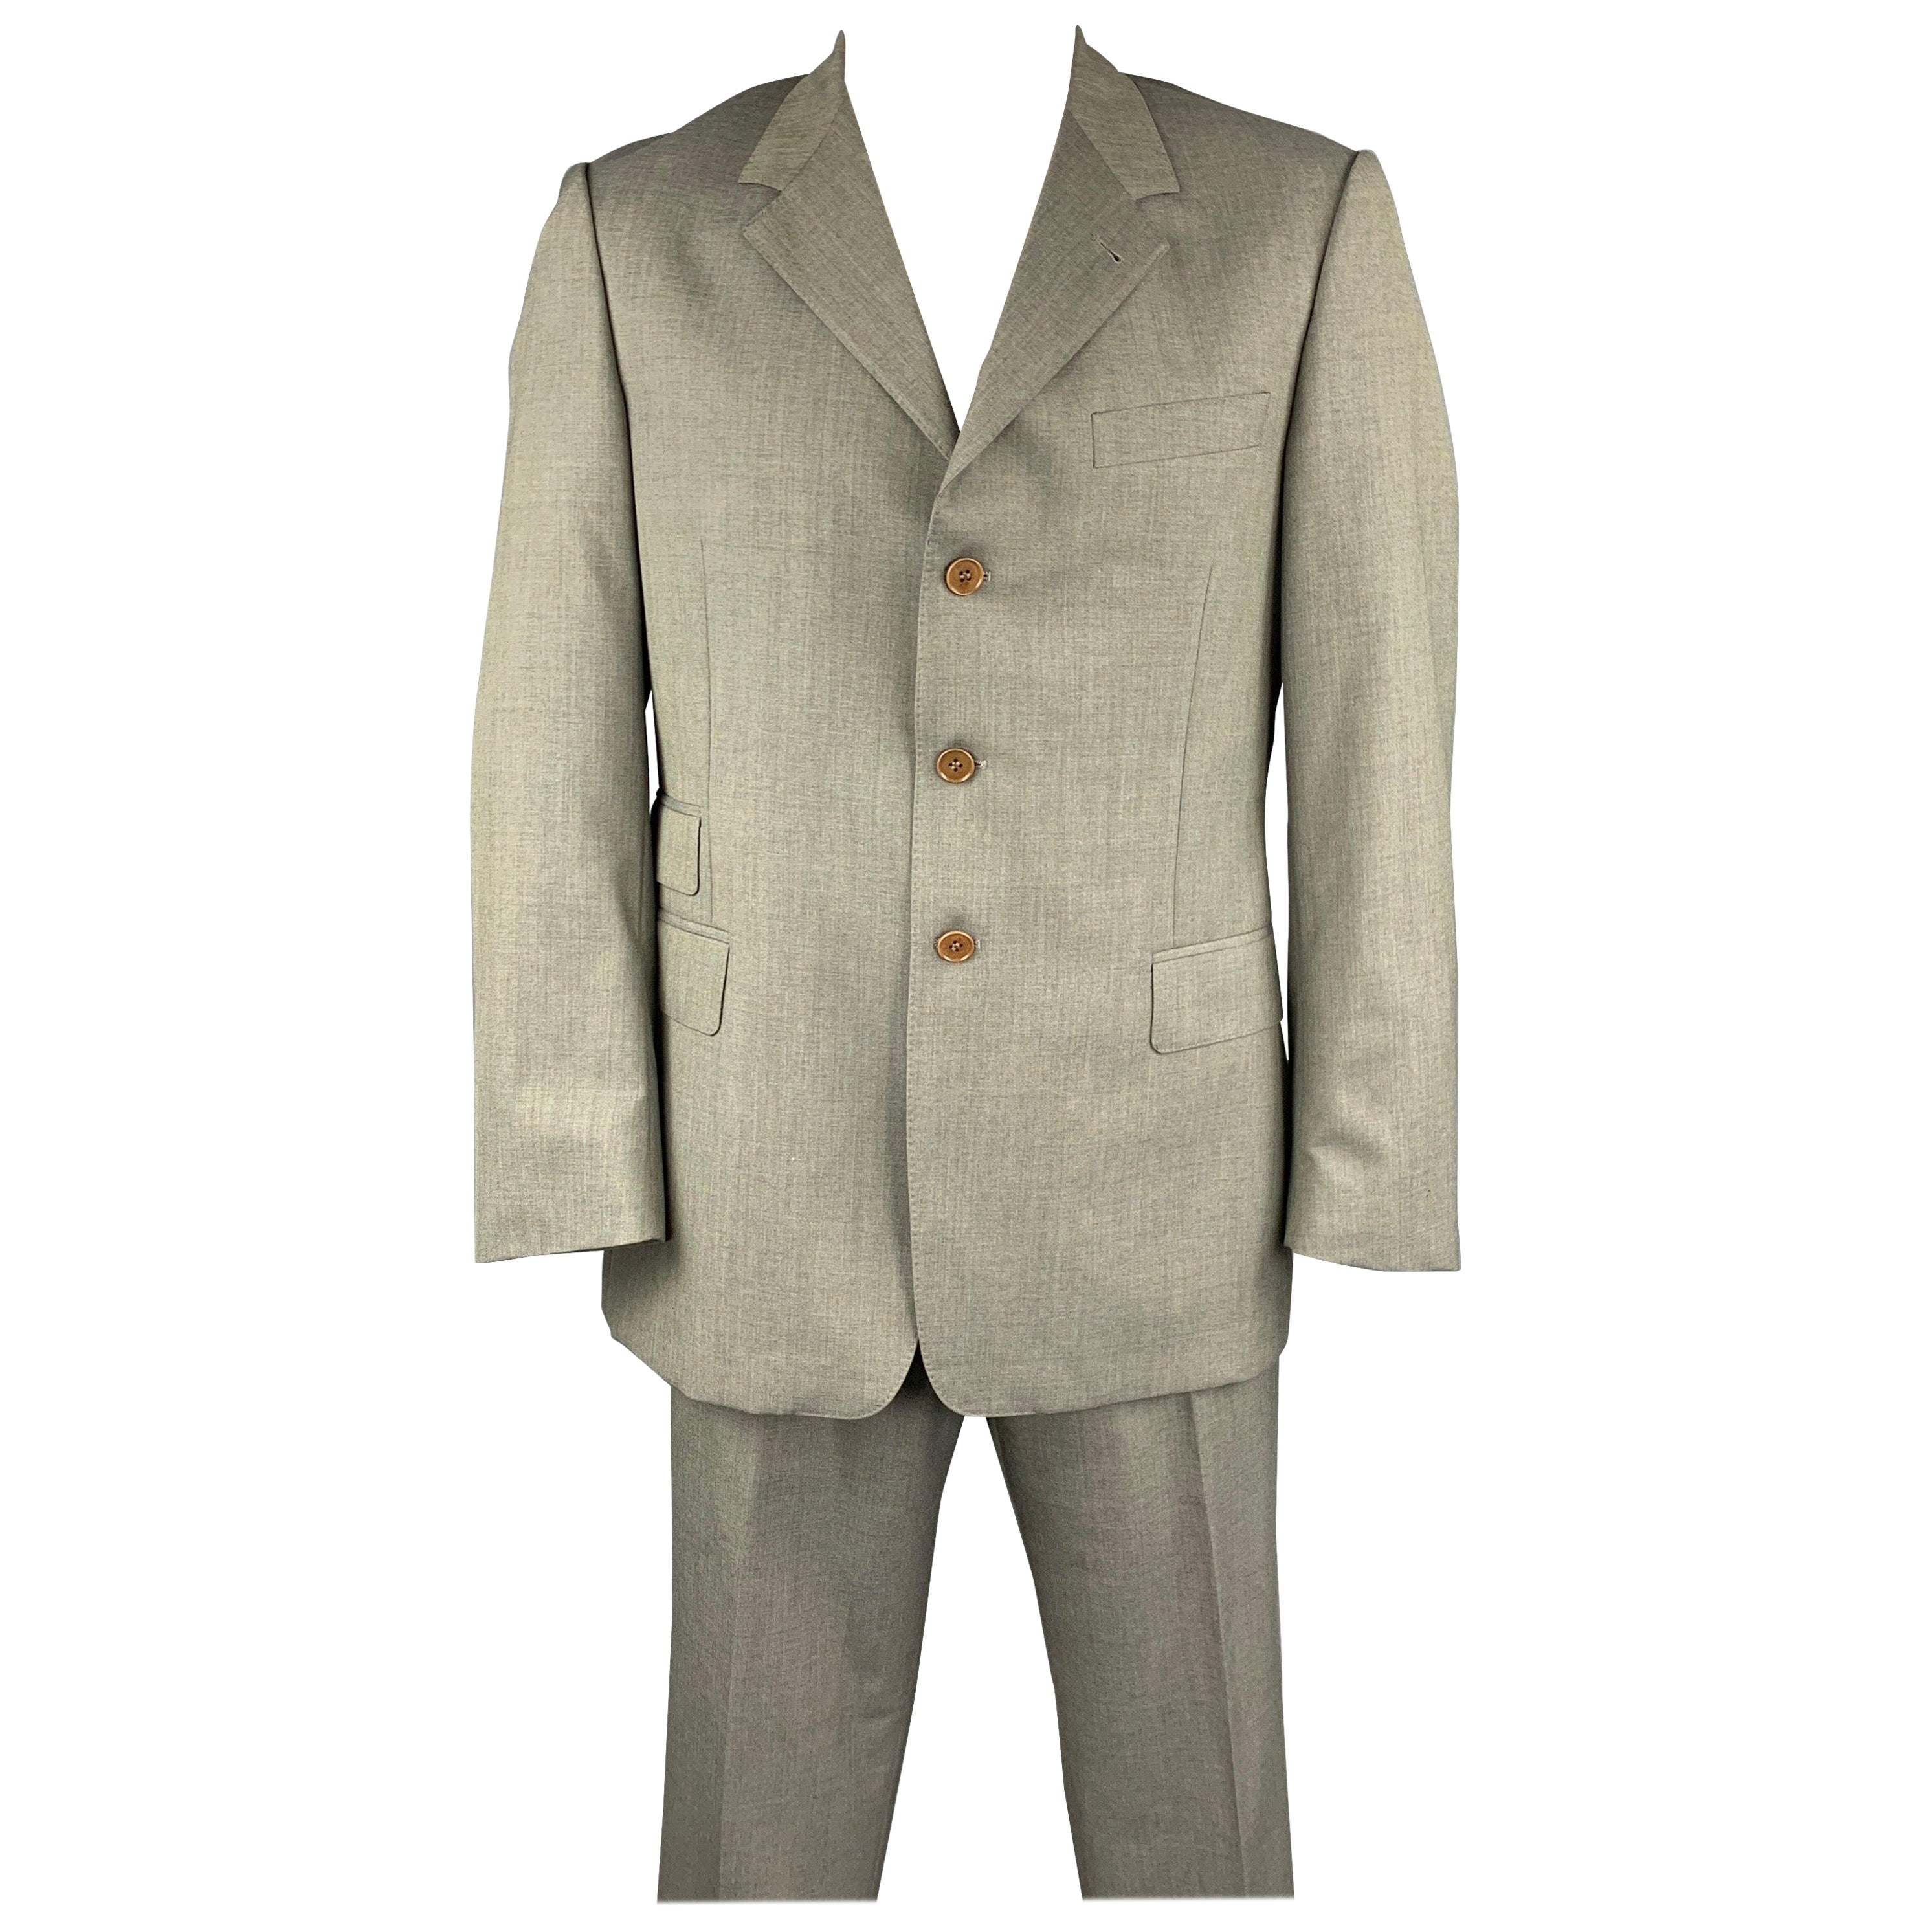 PAUL SMITH The Byard Size 44 Regular Grey Wool Notch Lapel Suit For Sale